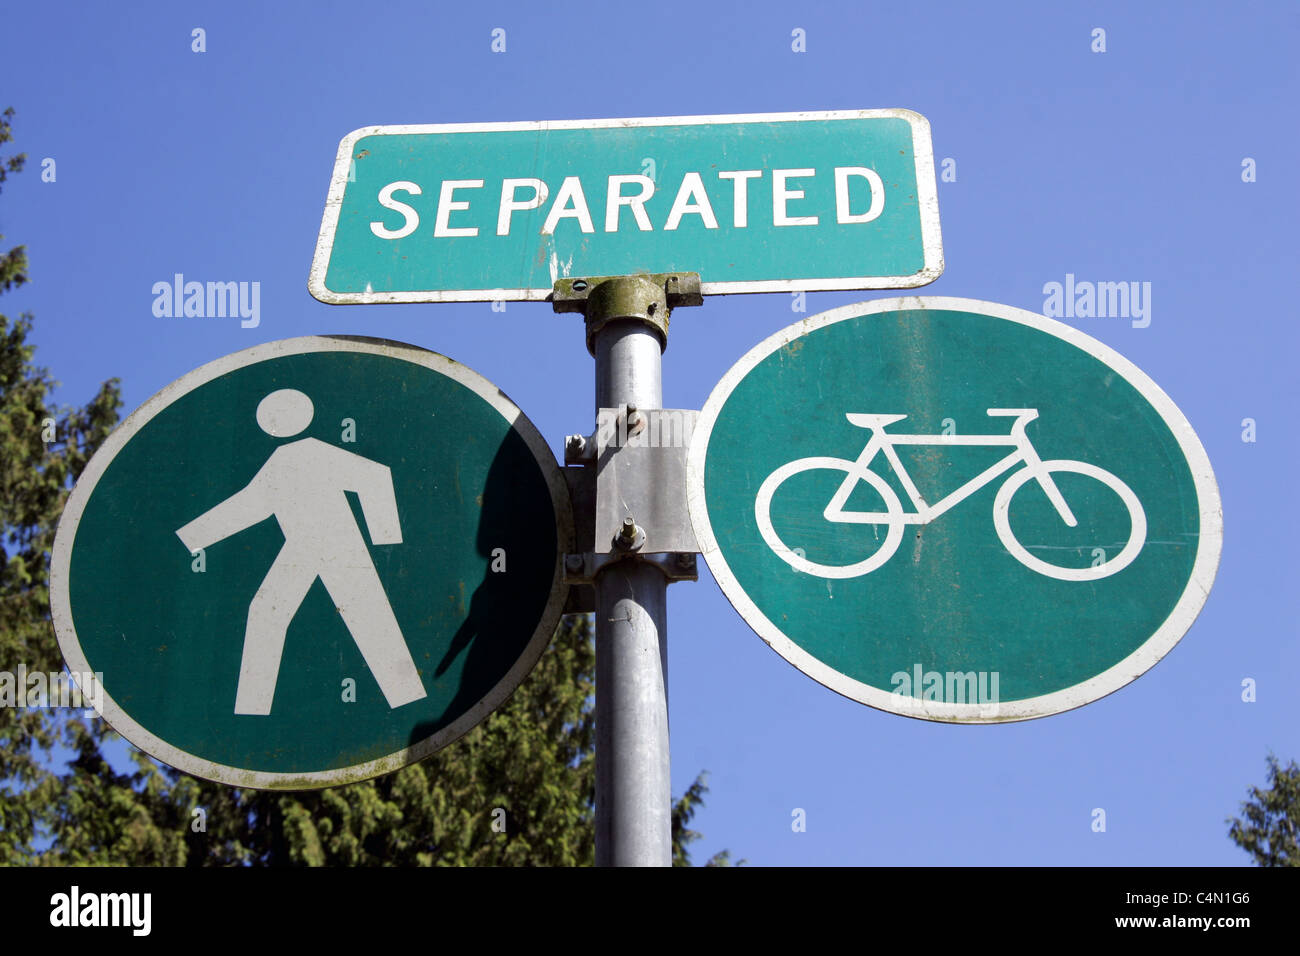 Separated path sign for pedestrians and cyclists Stock Photo